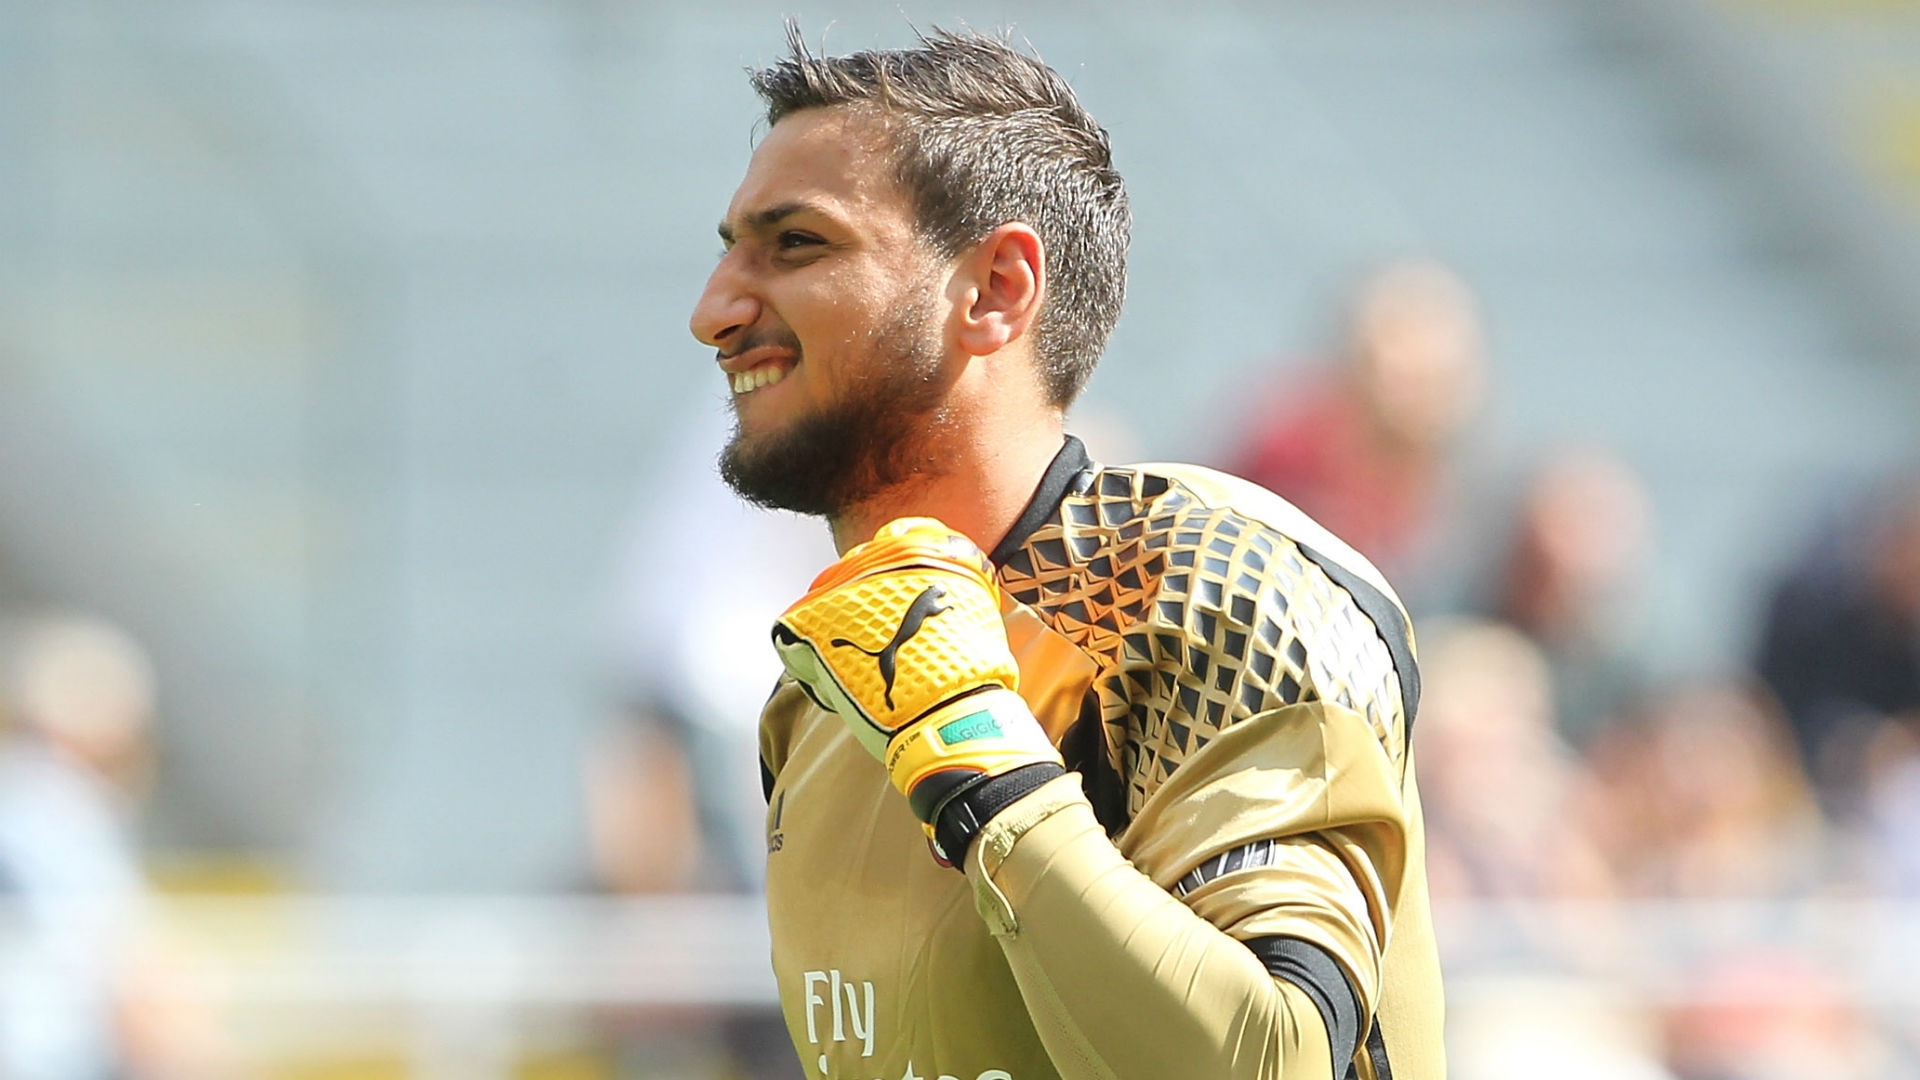 A supporter of Milan, Donnarumma got to make his debut for the club at just age 16.